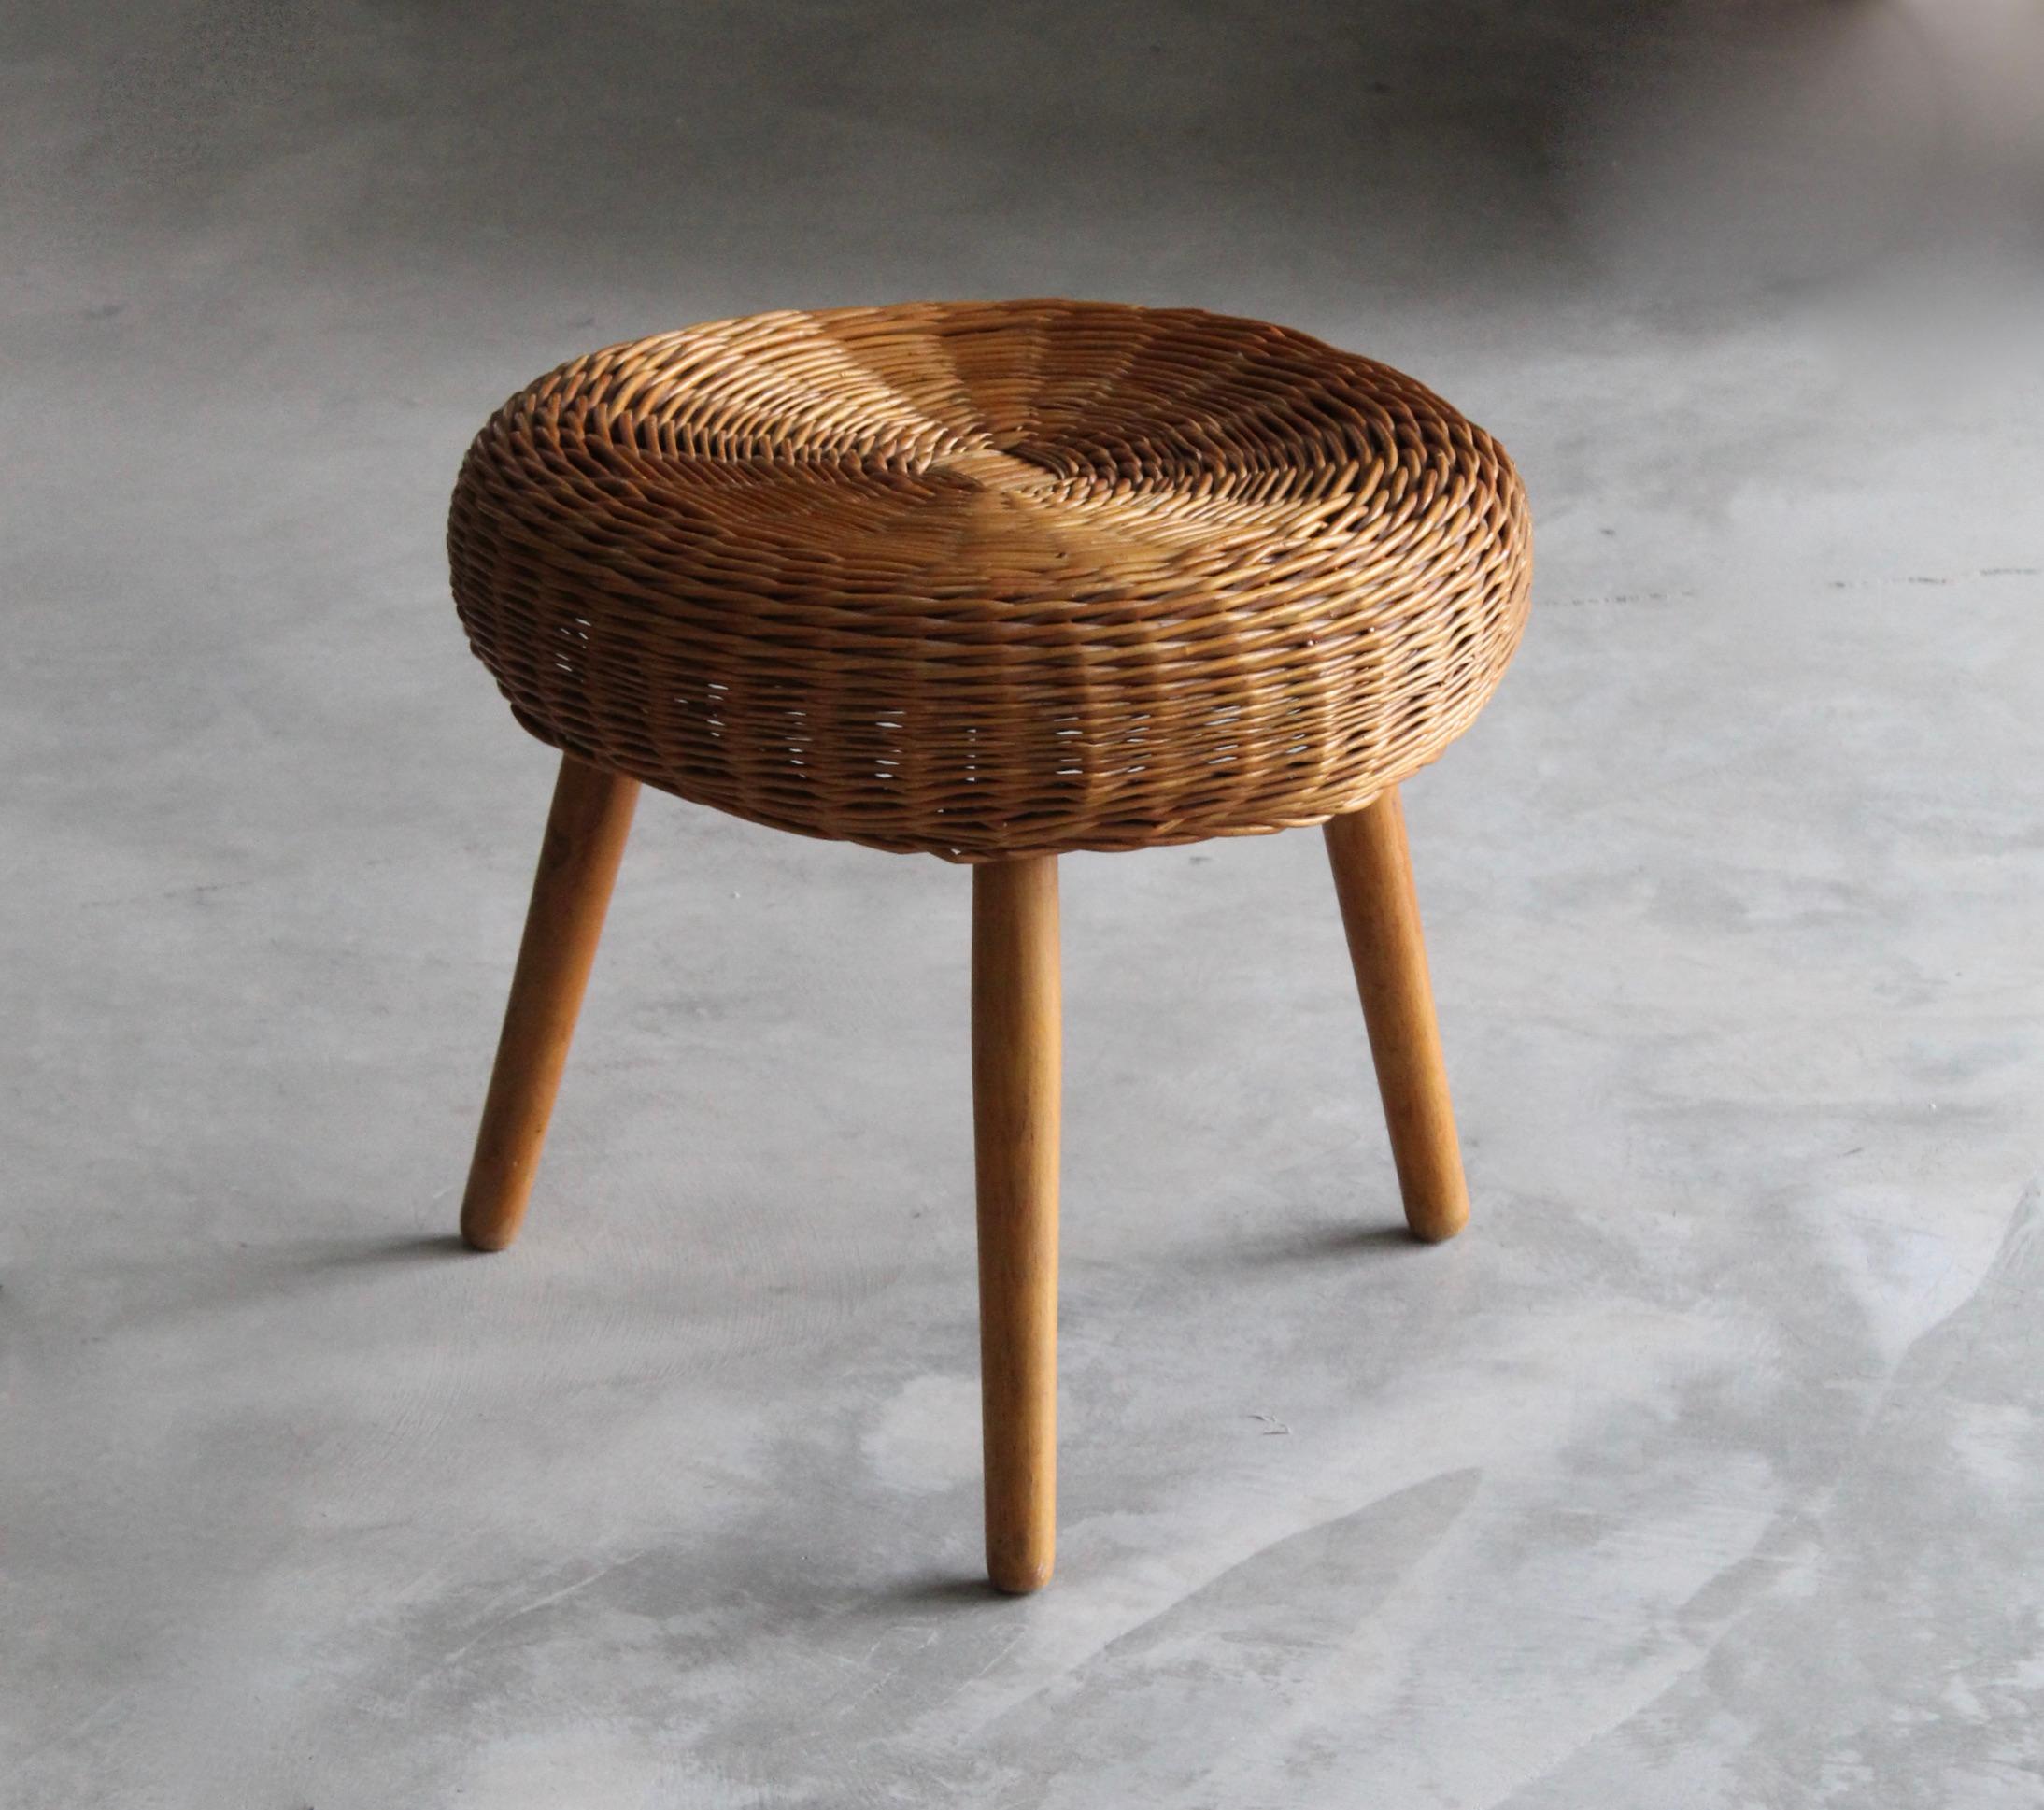 A stool, design attributed to Tony Paul. Features a mix of rattan and finely carved solid wood.

Other designers of the period include Charlotte Perriand, Pierre Chapo, Isamu Noguchi, Eero Arnio, and Sori Yanagi.